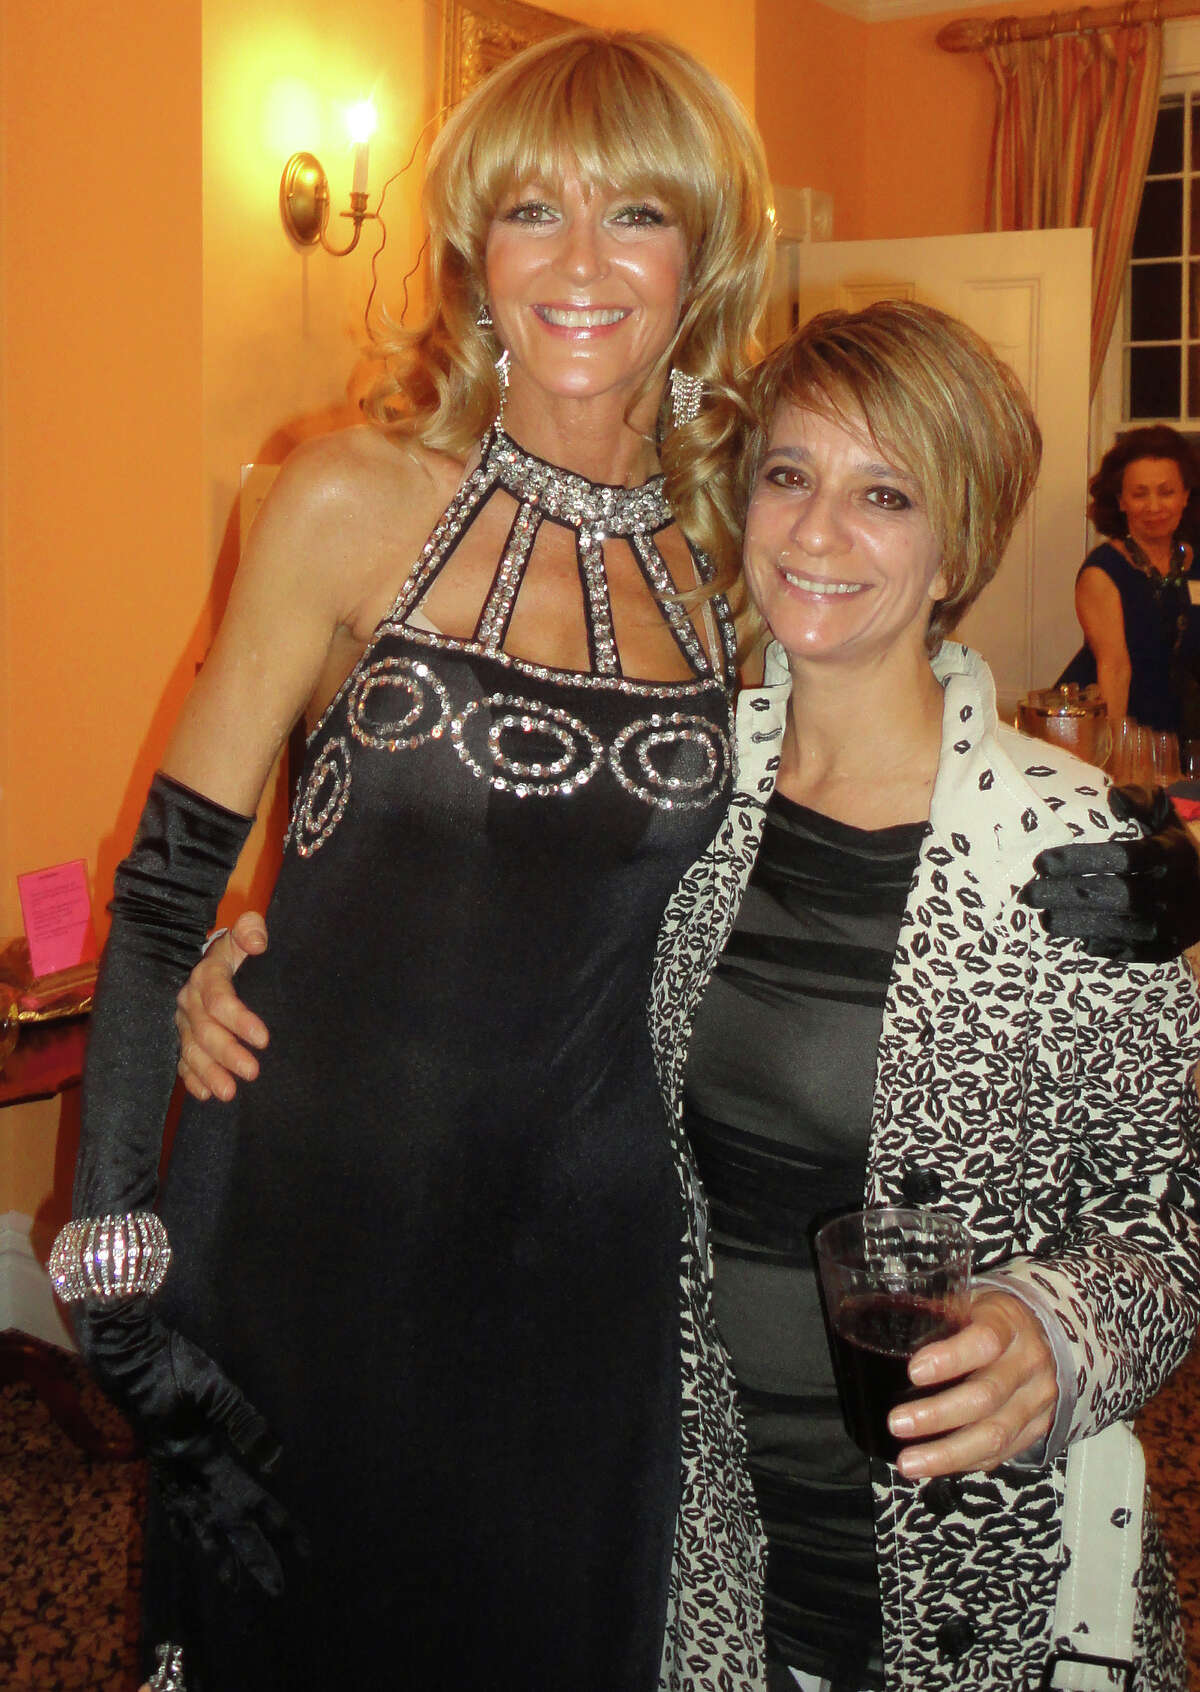 Westport artist Liz Beeby wears a black vintage gown with silver sequins trim Friday as she poses at the Westport Woman's Club with Paula Gallo of Westport, a recipient of a Westport Woman's Club scholarship. Proceeds of the fashion show will go to the club's scholarship program.